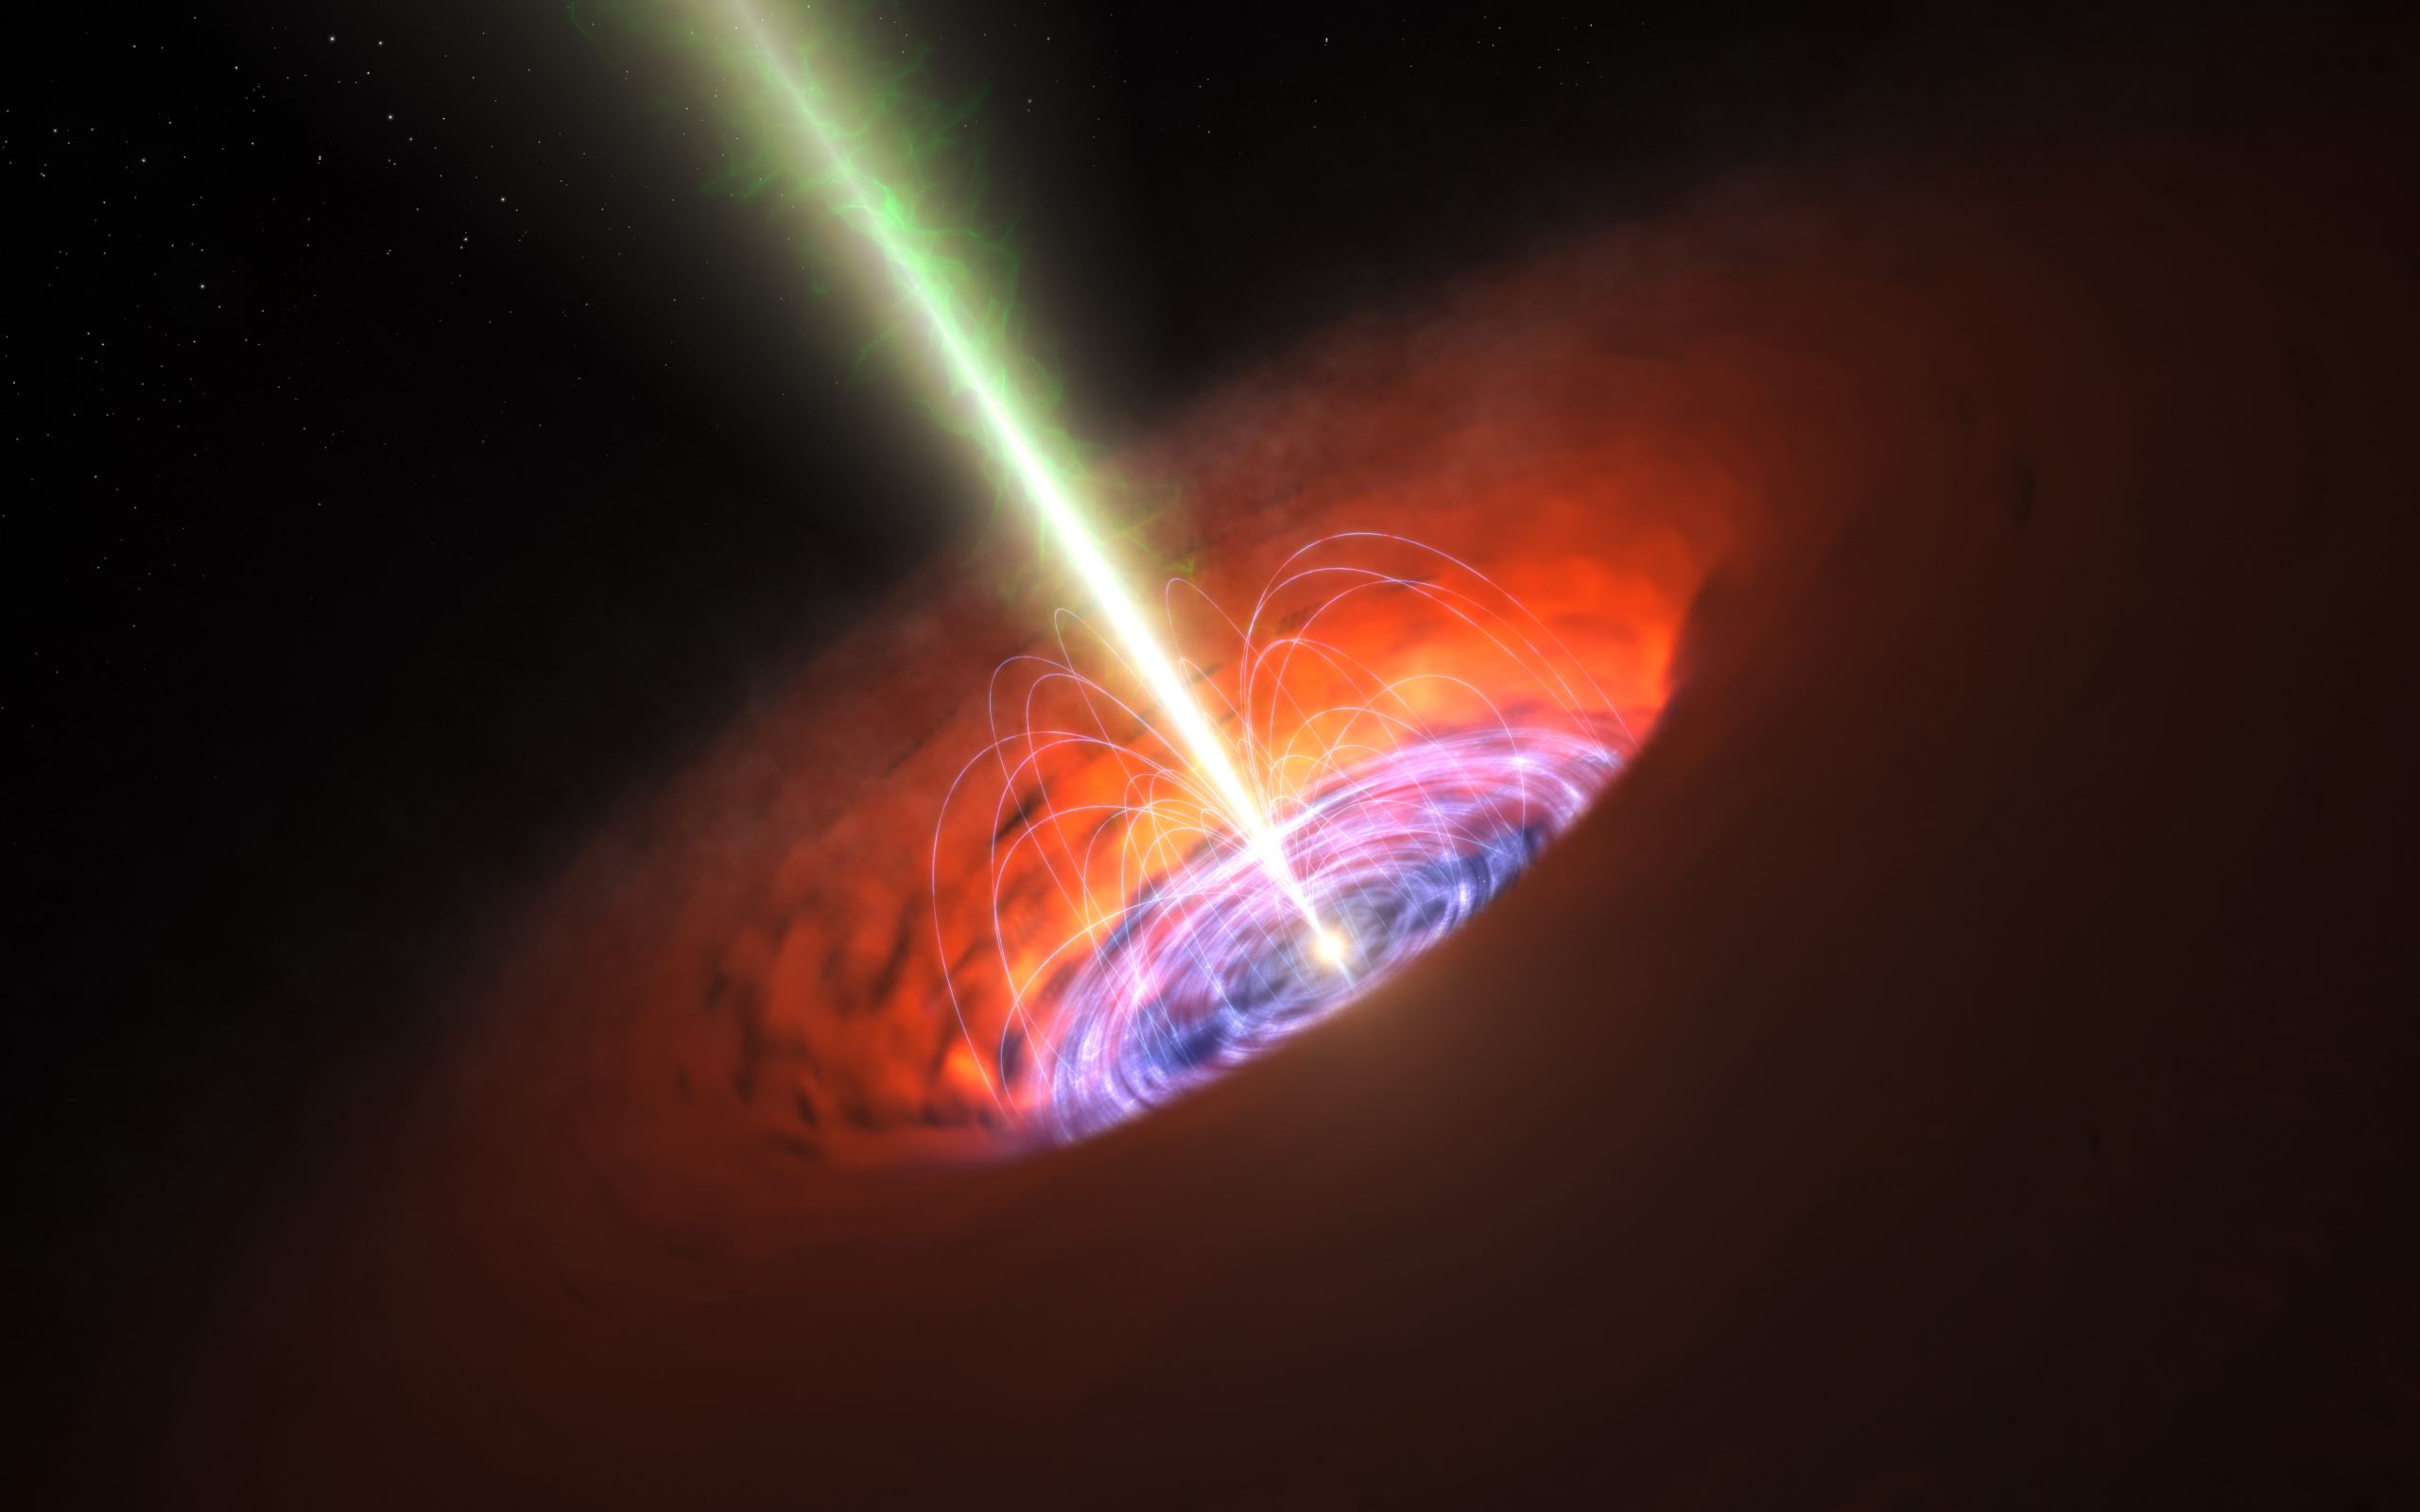 Hungry Black Hole was Already Feasting 800 Million Years After the Big Bang